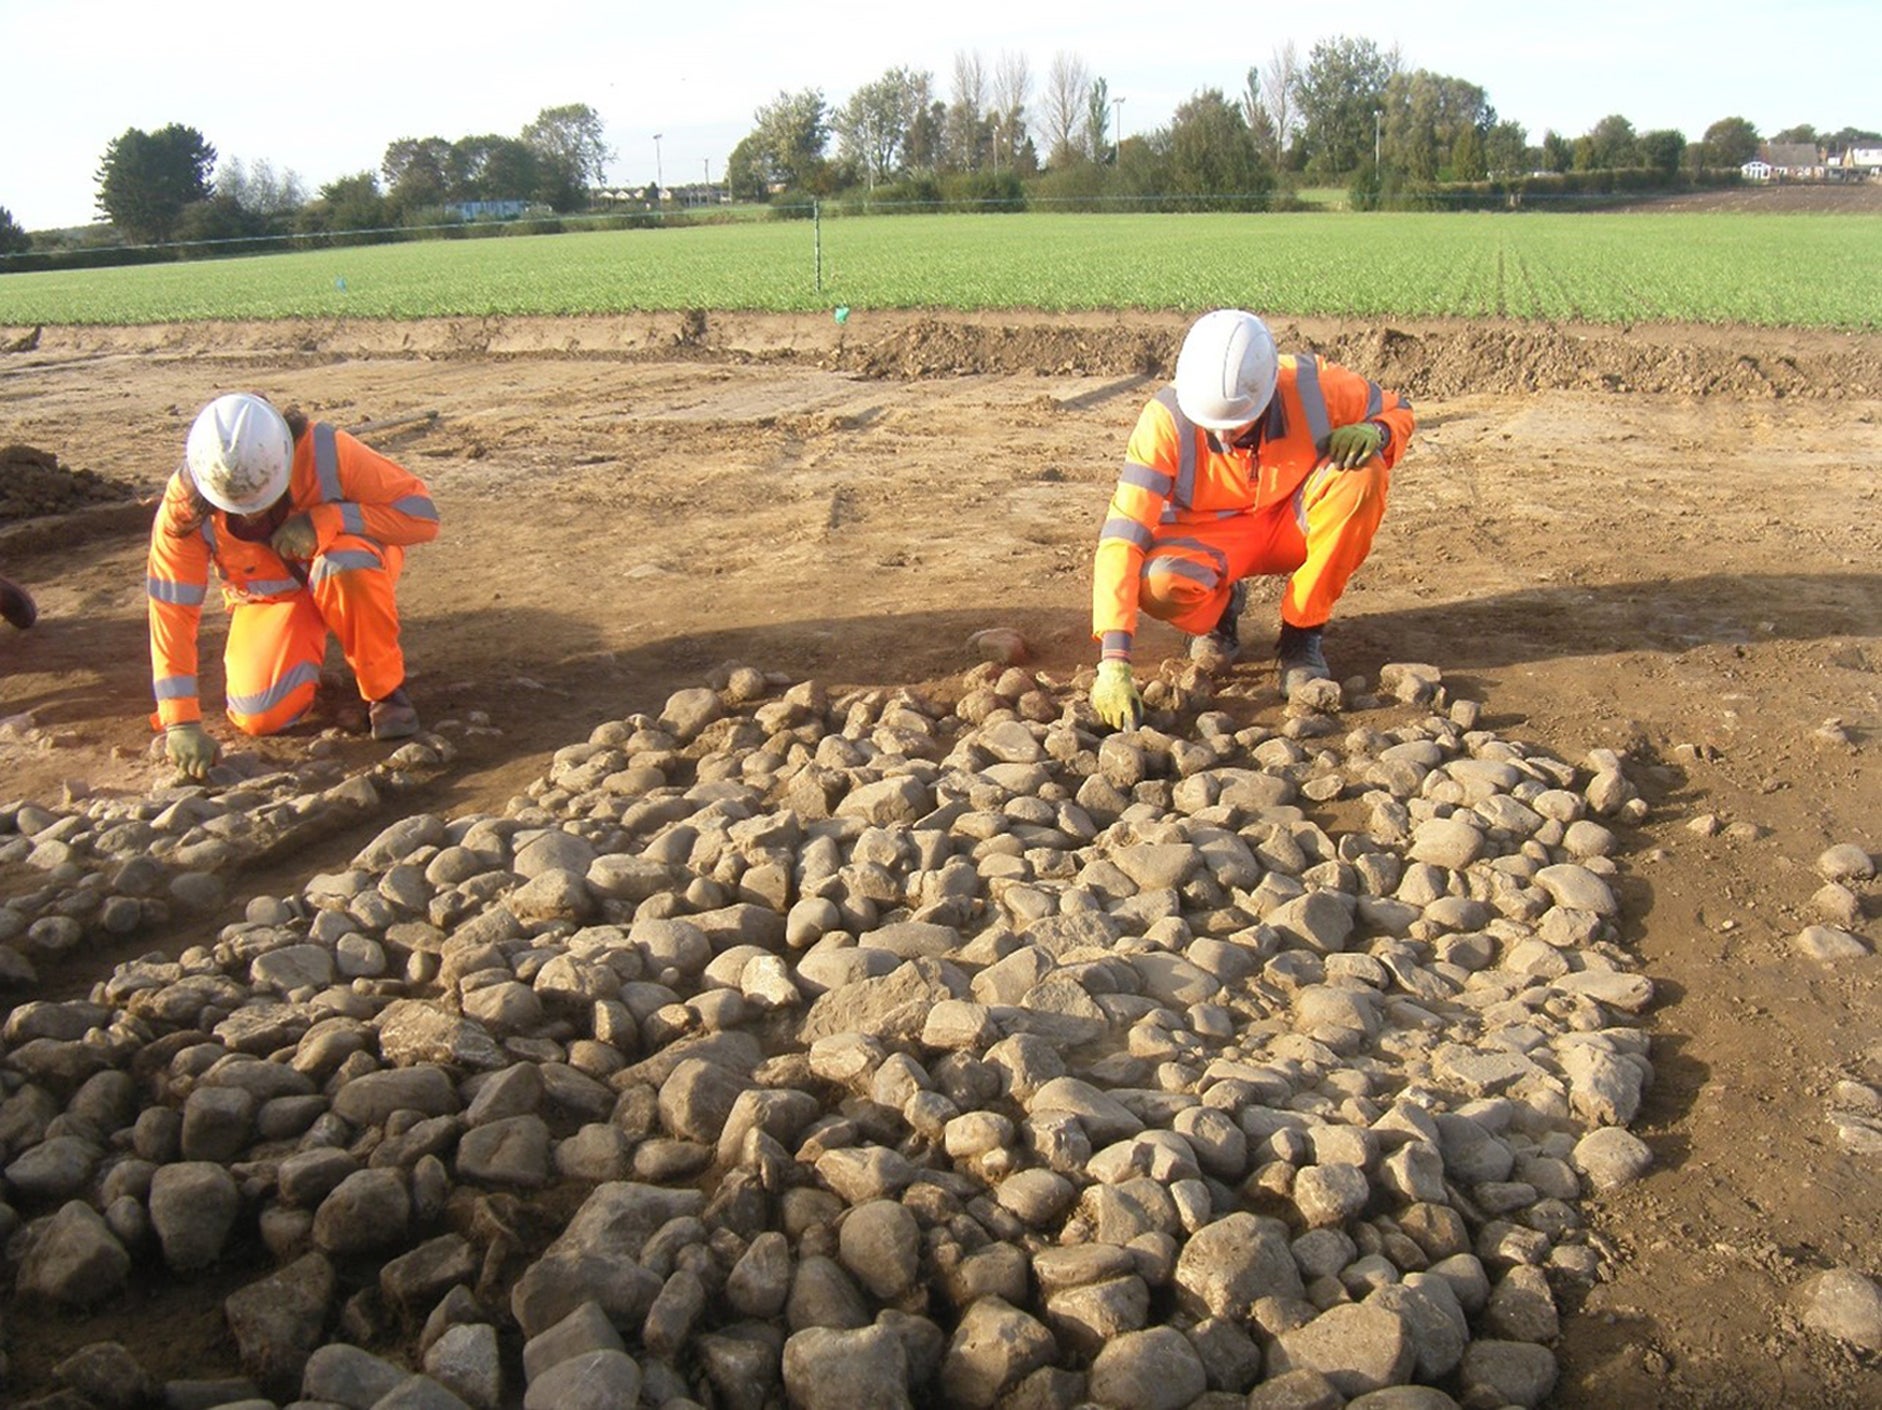 Staff investigating Roman Road foundations at Yorkshire Water's Full Sutton works